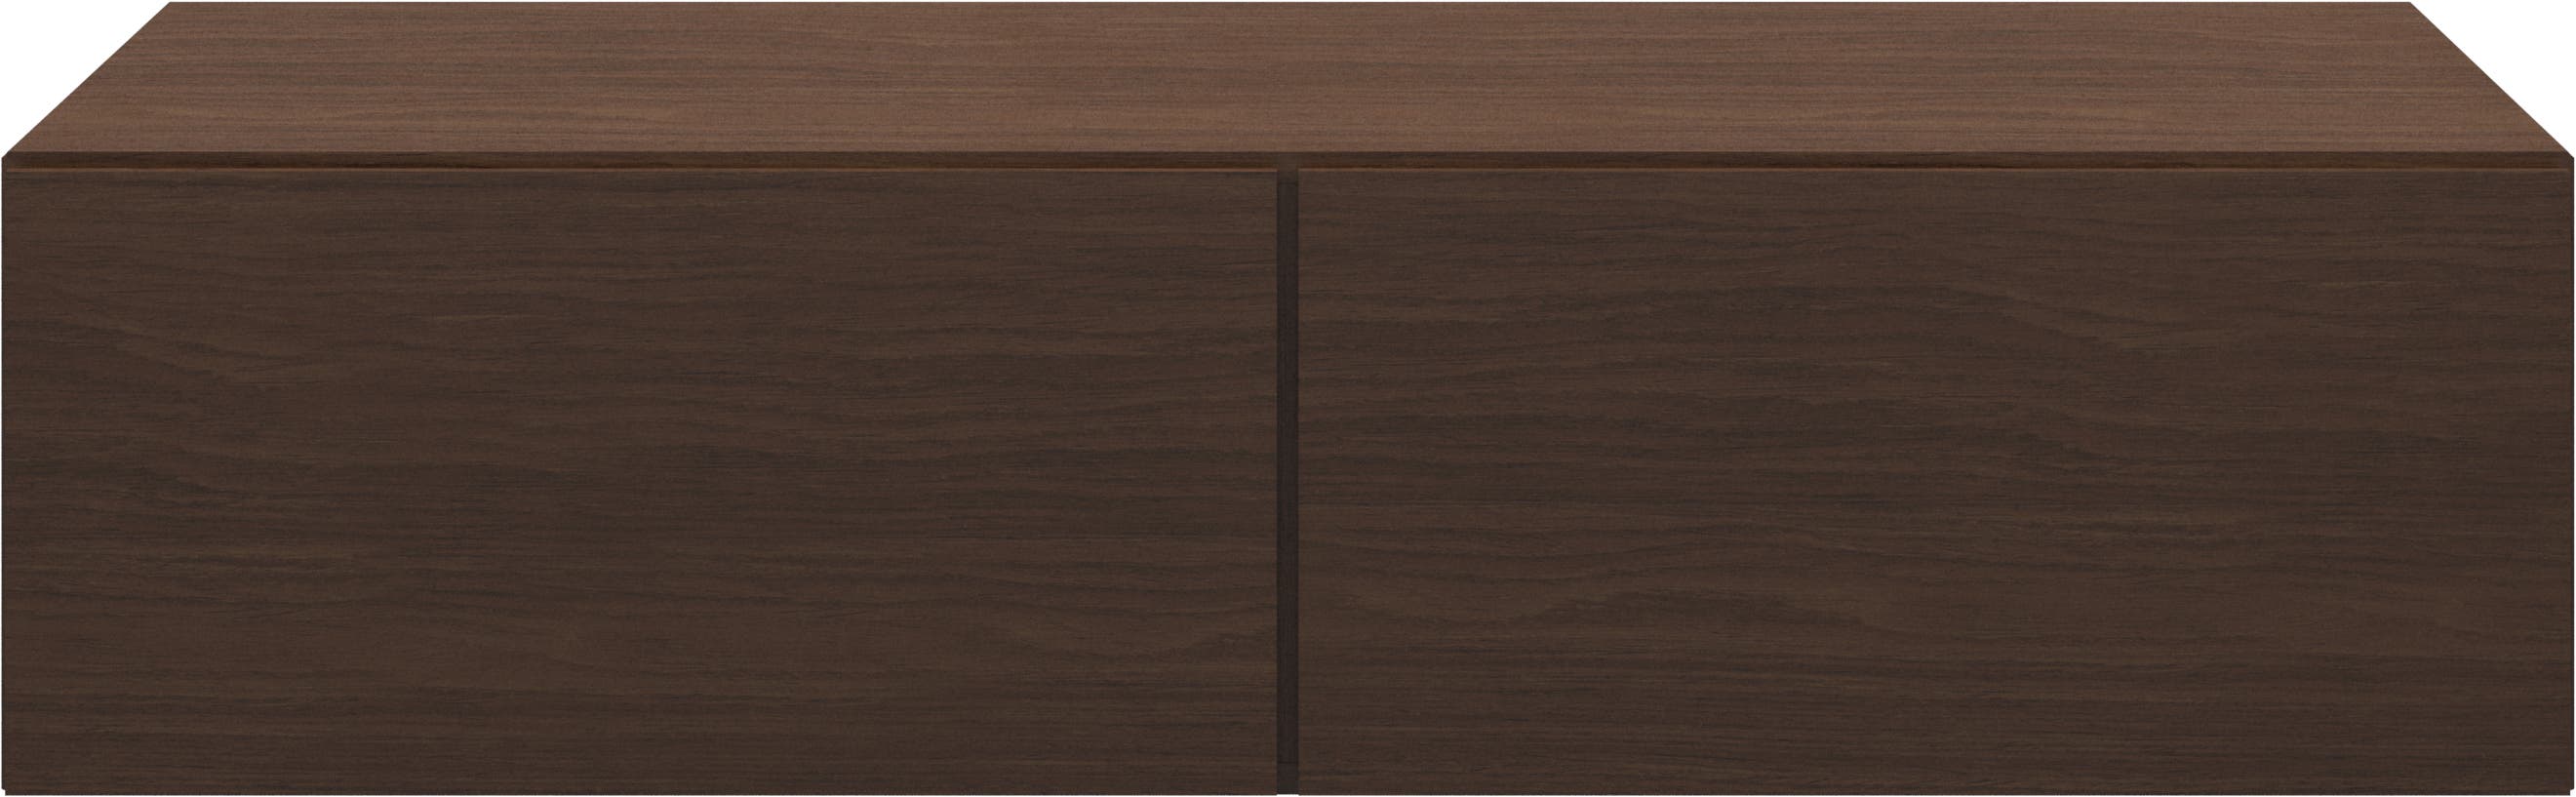 Lugano wall mounted cabinet with drop-down doors